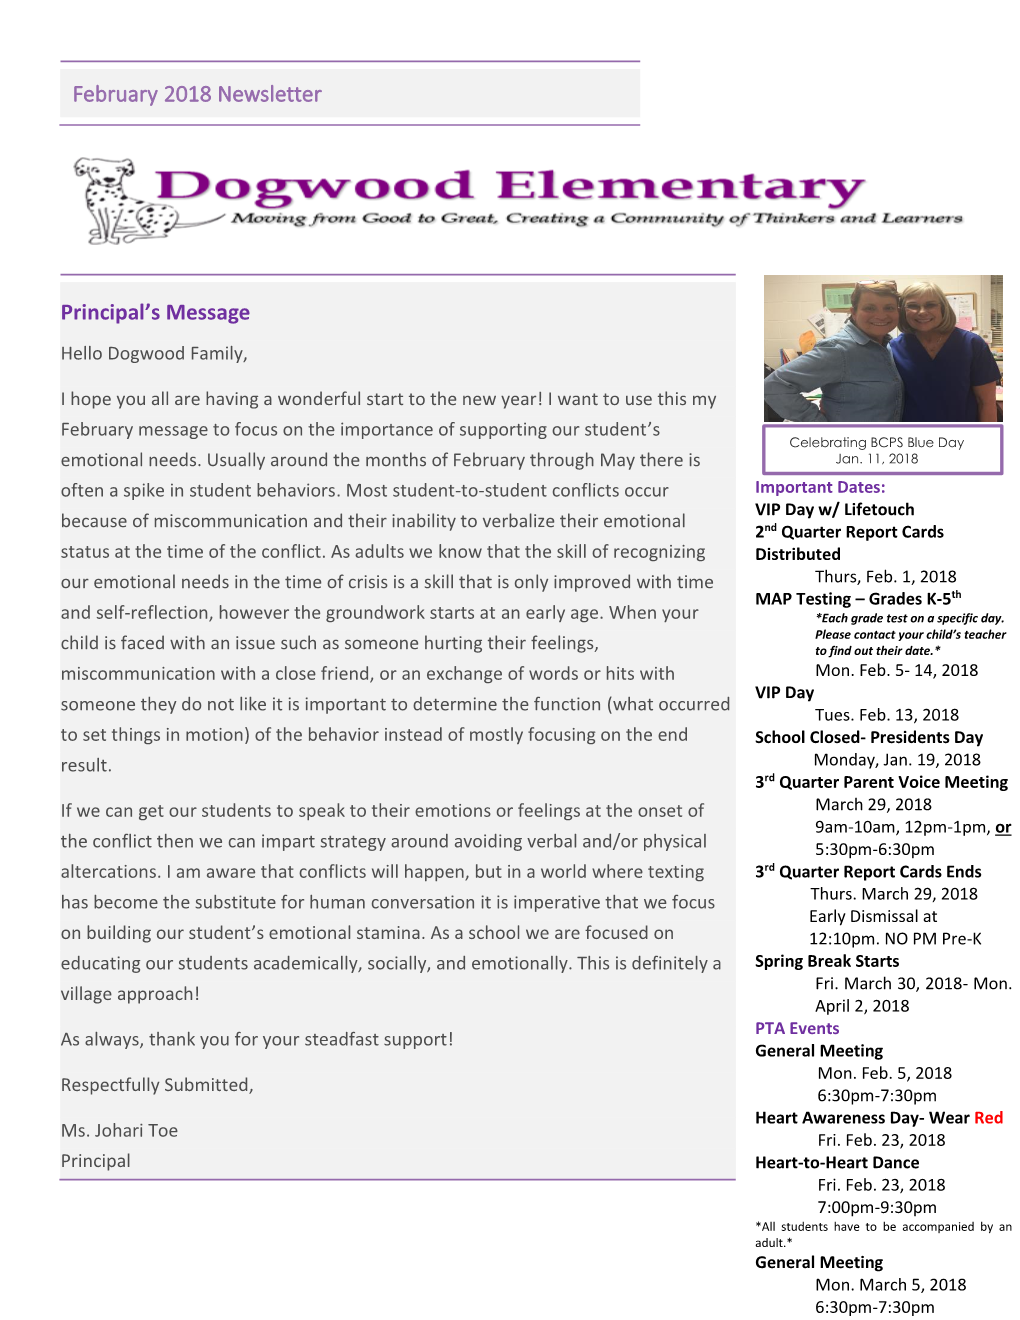 February 2018 Newsletter Principal's Message